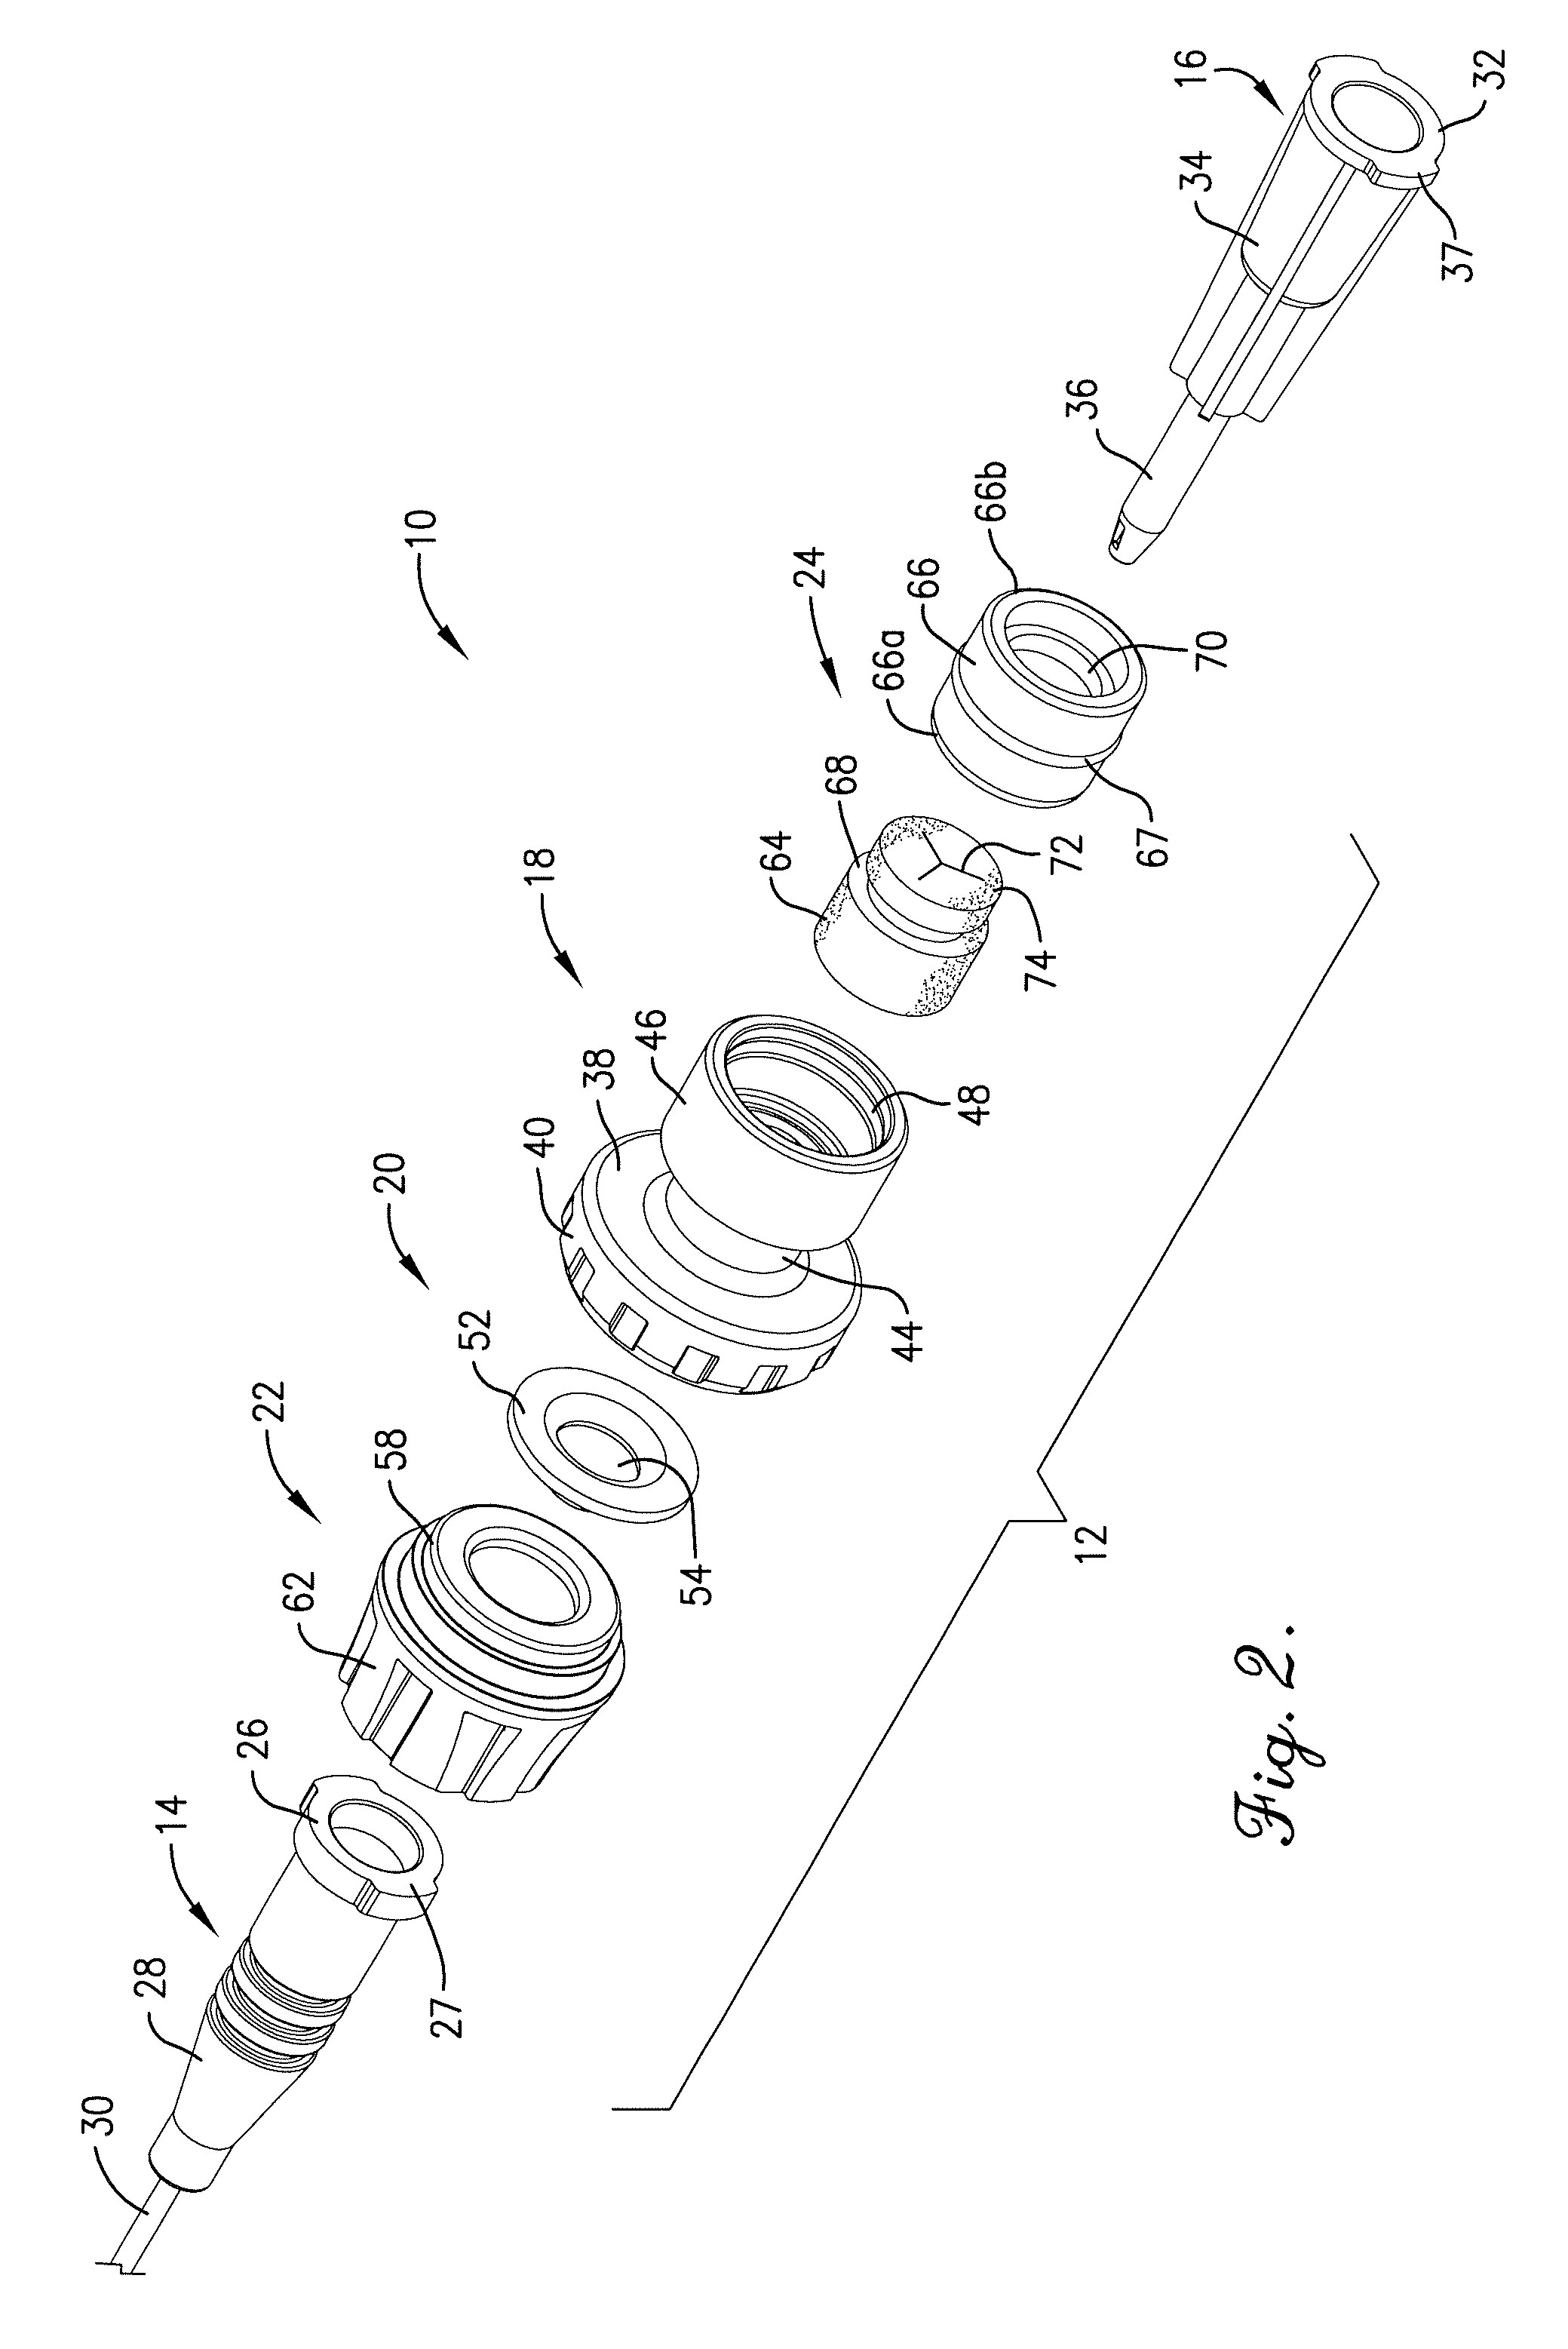 Intravenous injection site with split septum and pressure activated flow control valve